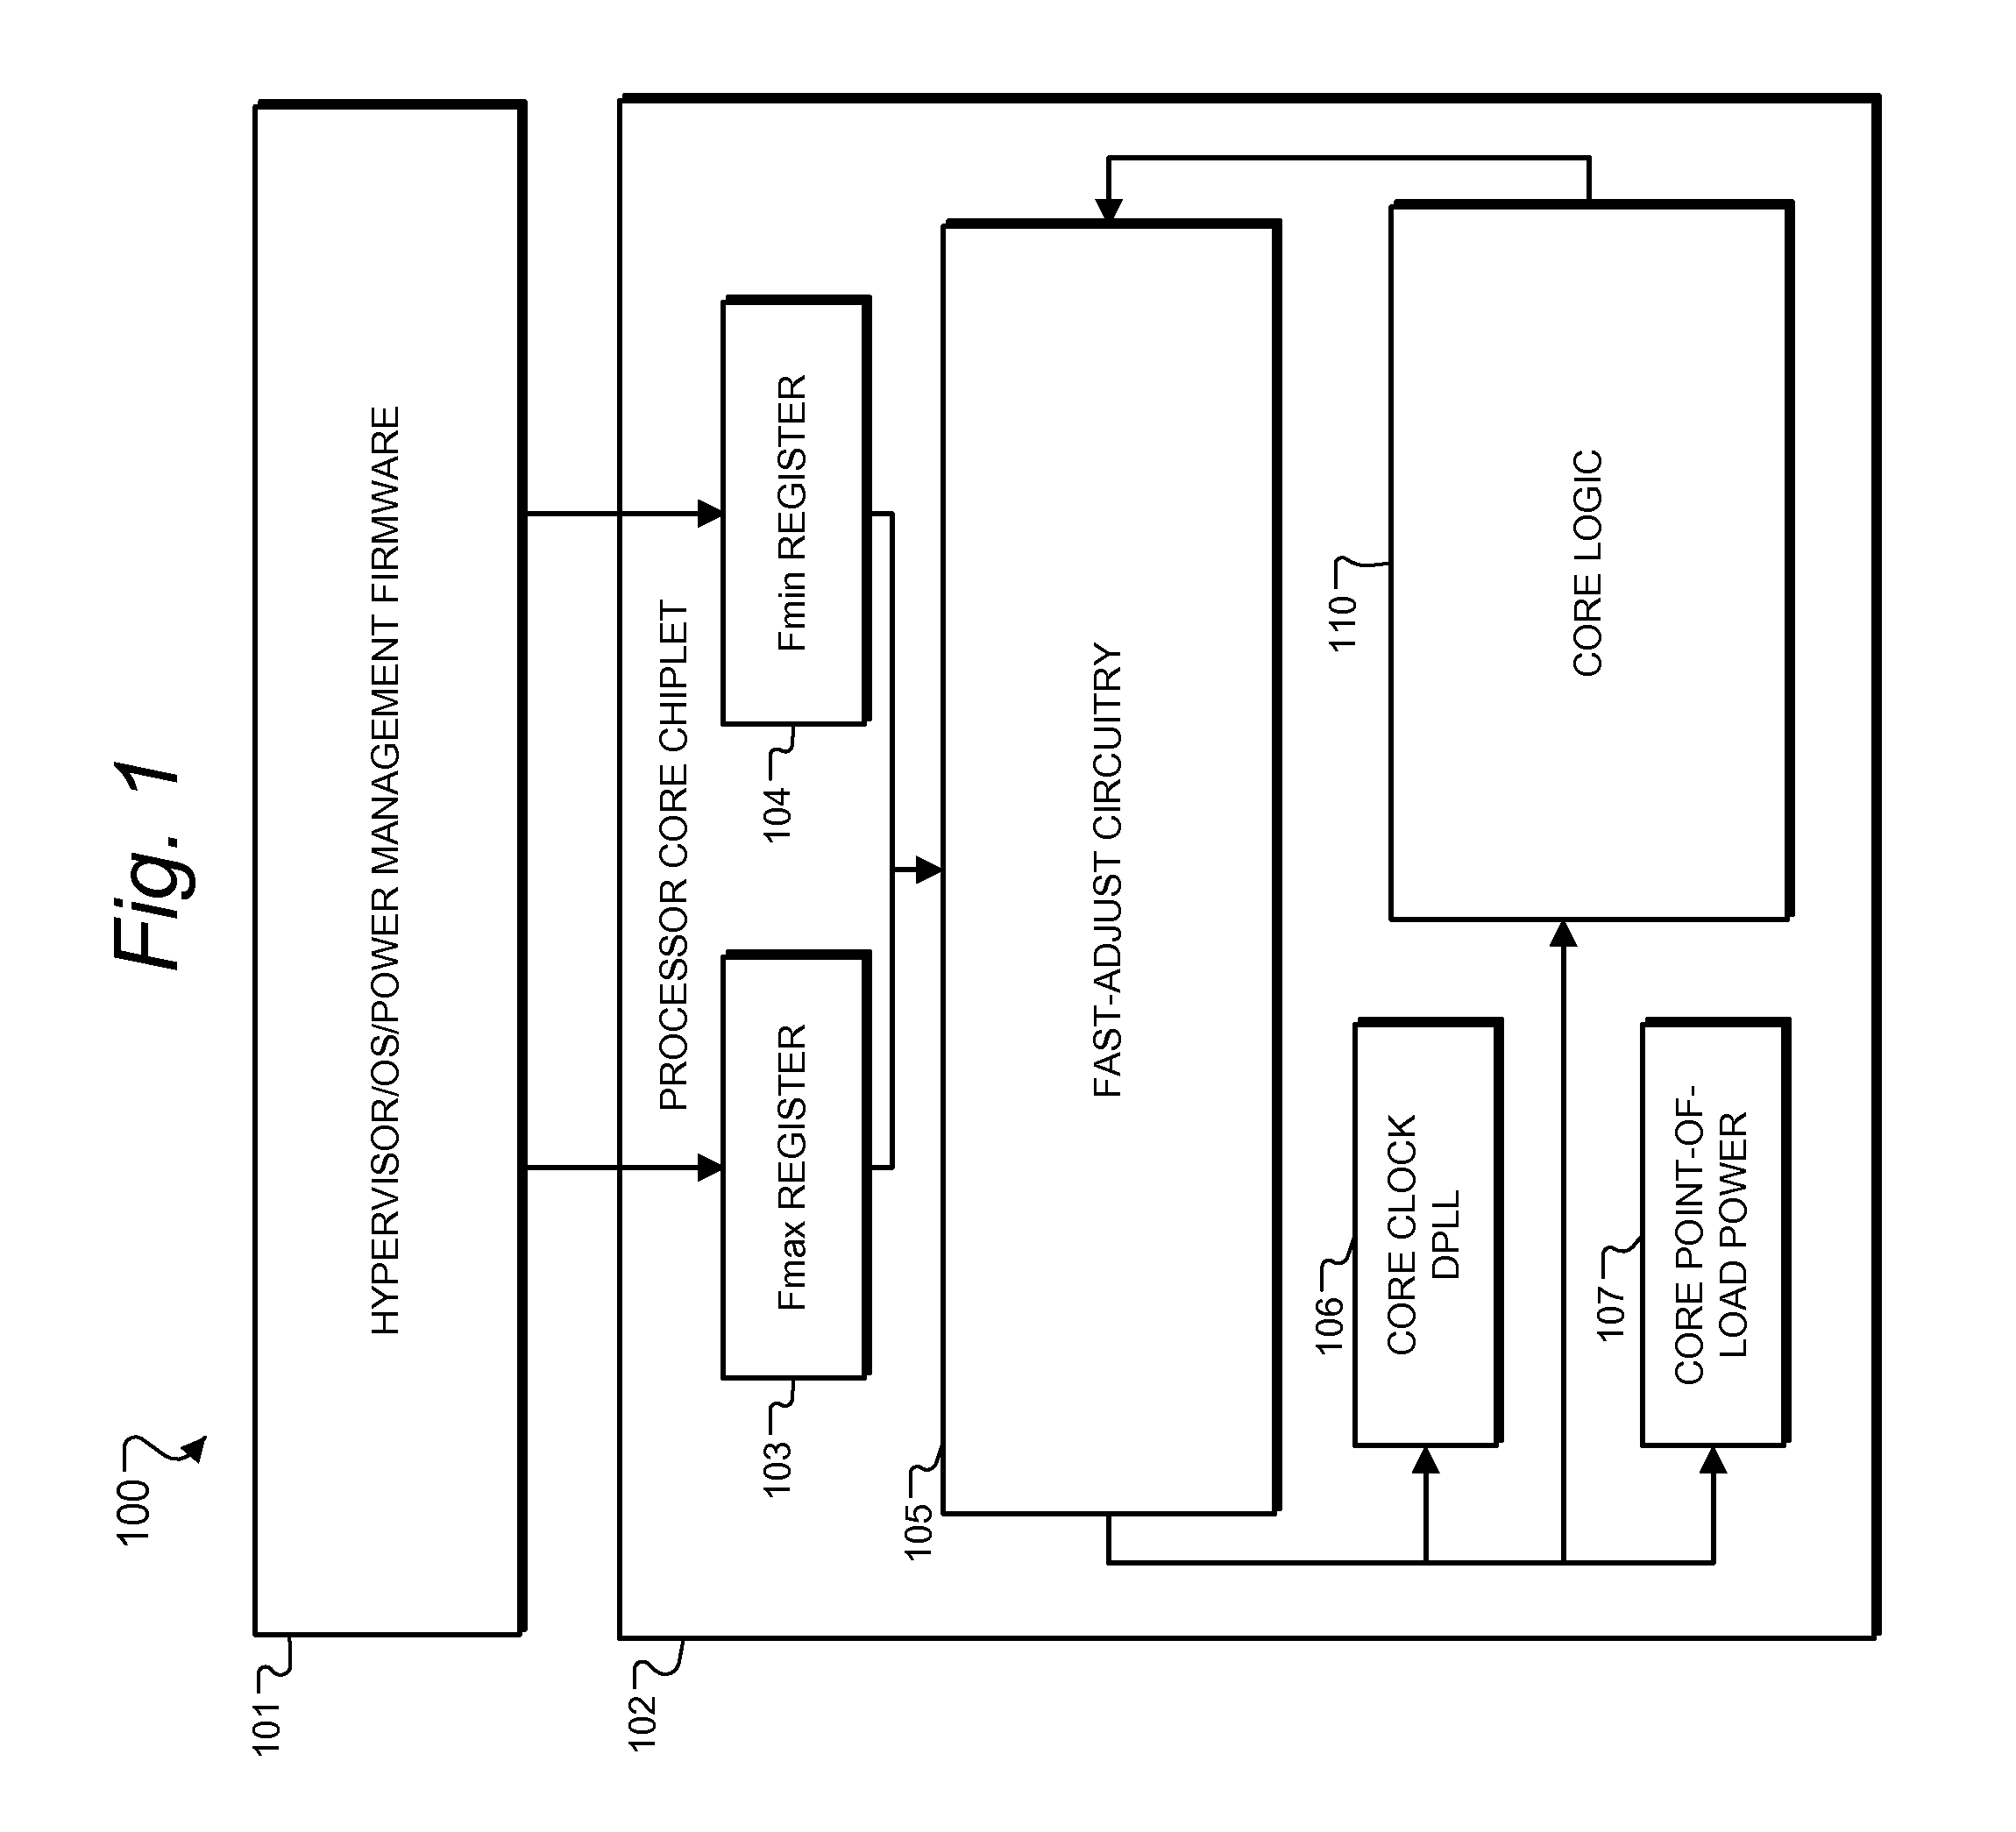 System and Method for Managing the Power-Performance Range of an Application